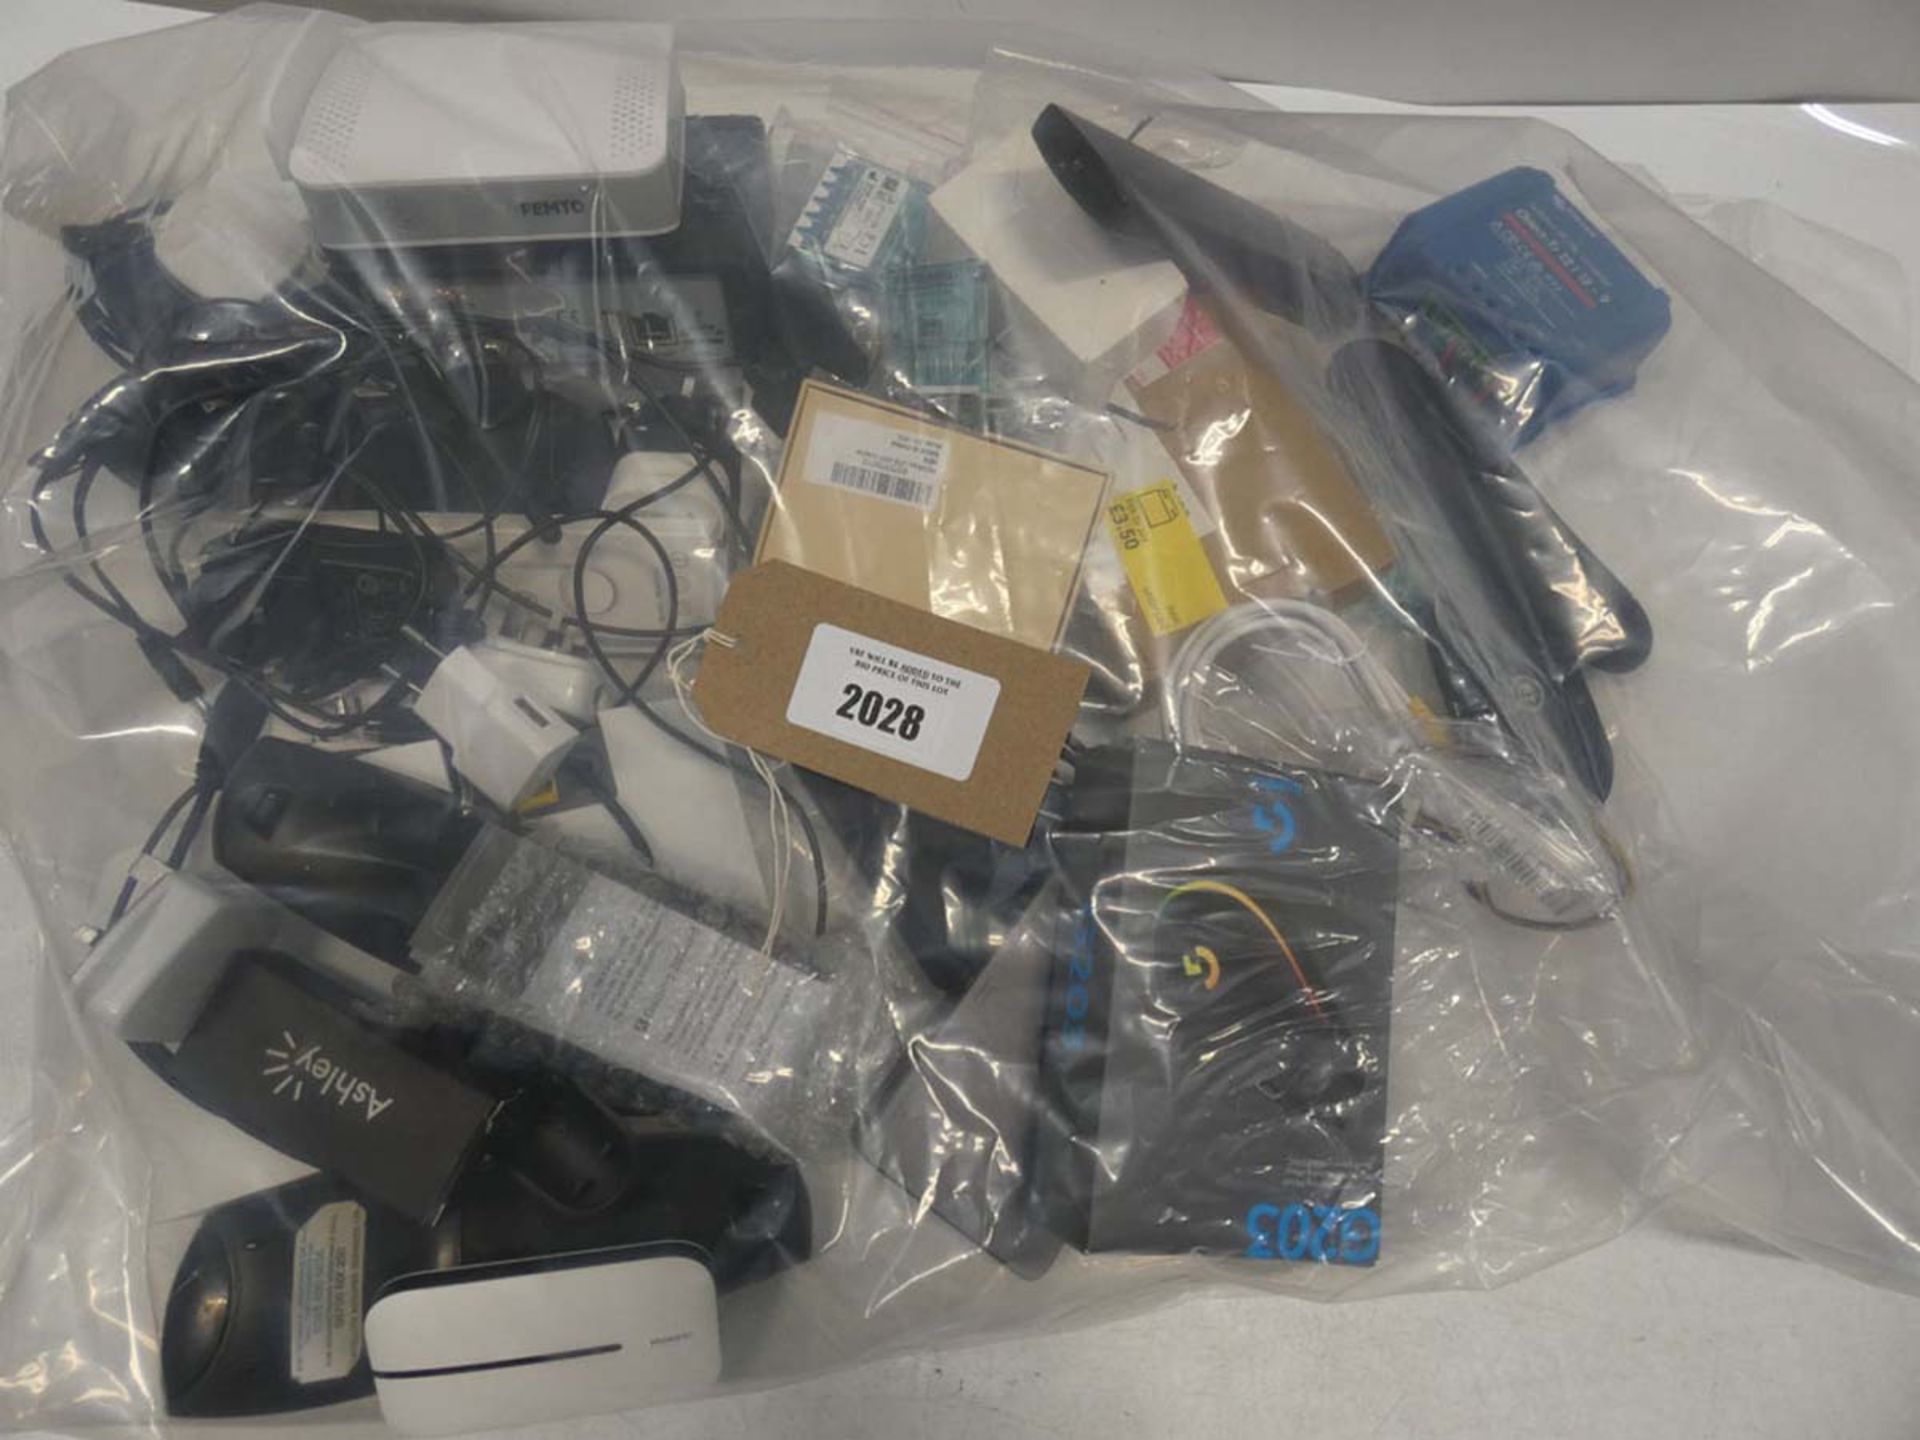 Bag containing electrical related accessories and devices